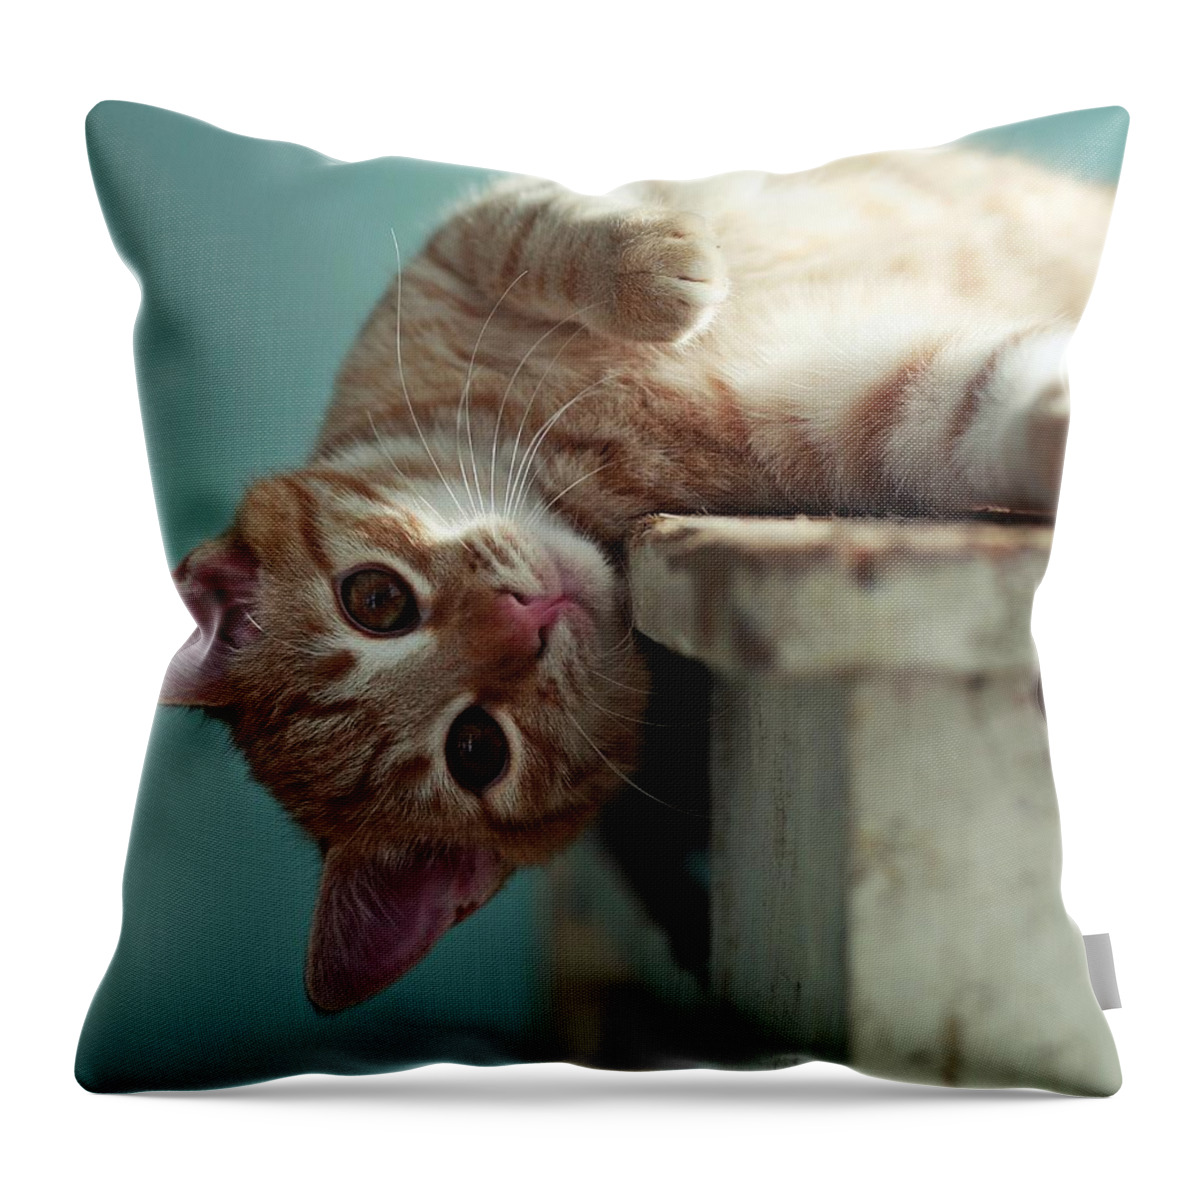 Pets Throw Pillow featuring the photograph Ginger Cat Leaning Over Table Looking by By Julie Mcinnes